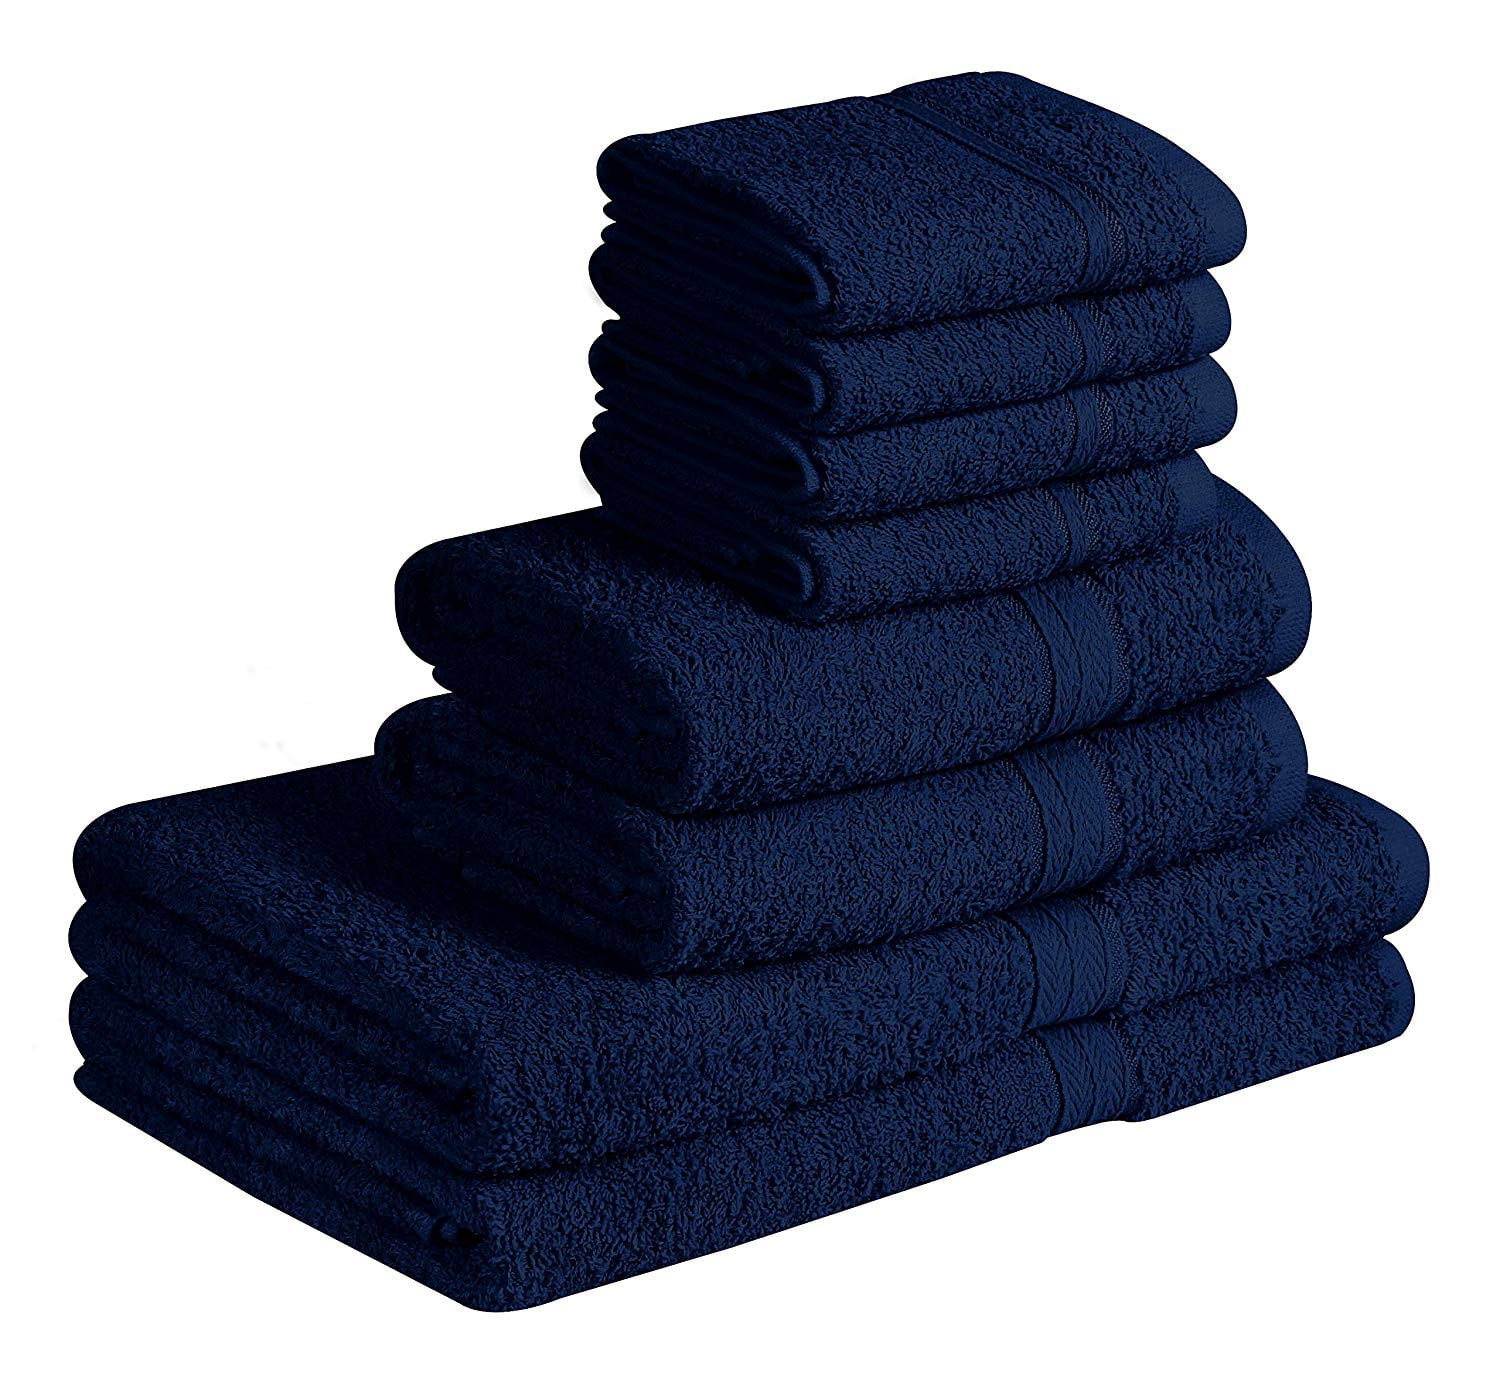 NEW PACK OF FACE CLOTH TOWELS FLANNELS WASH CLOTH 400 GSM 100% COTTON 